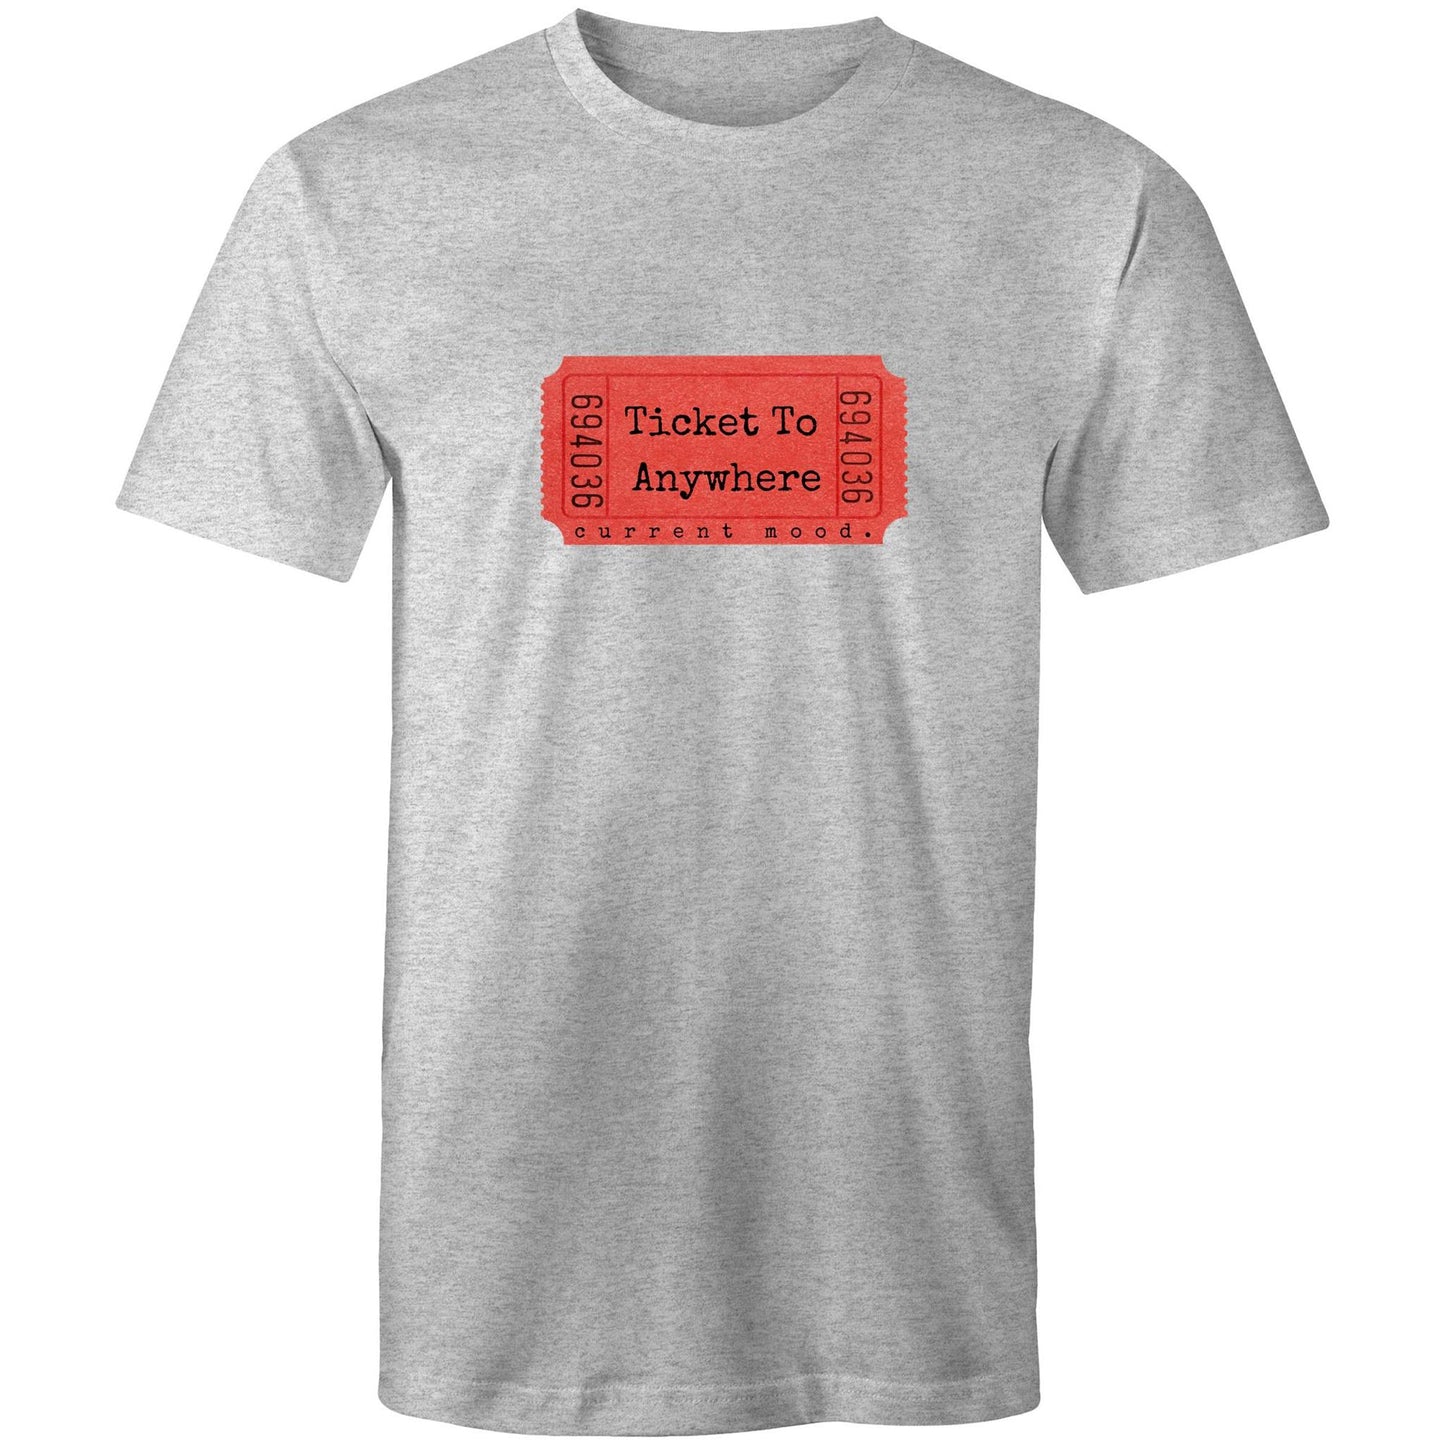 Current Mood 'TICKET TO ANYWHERE' Men's Tee